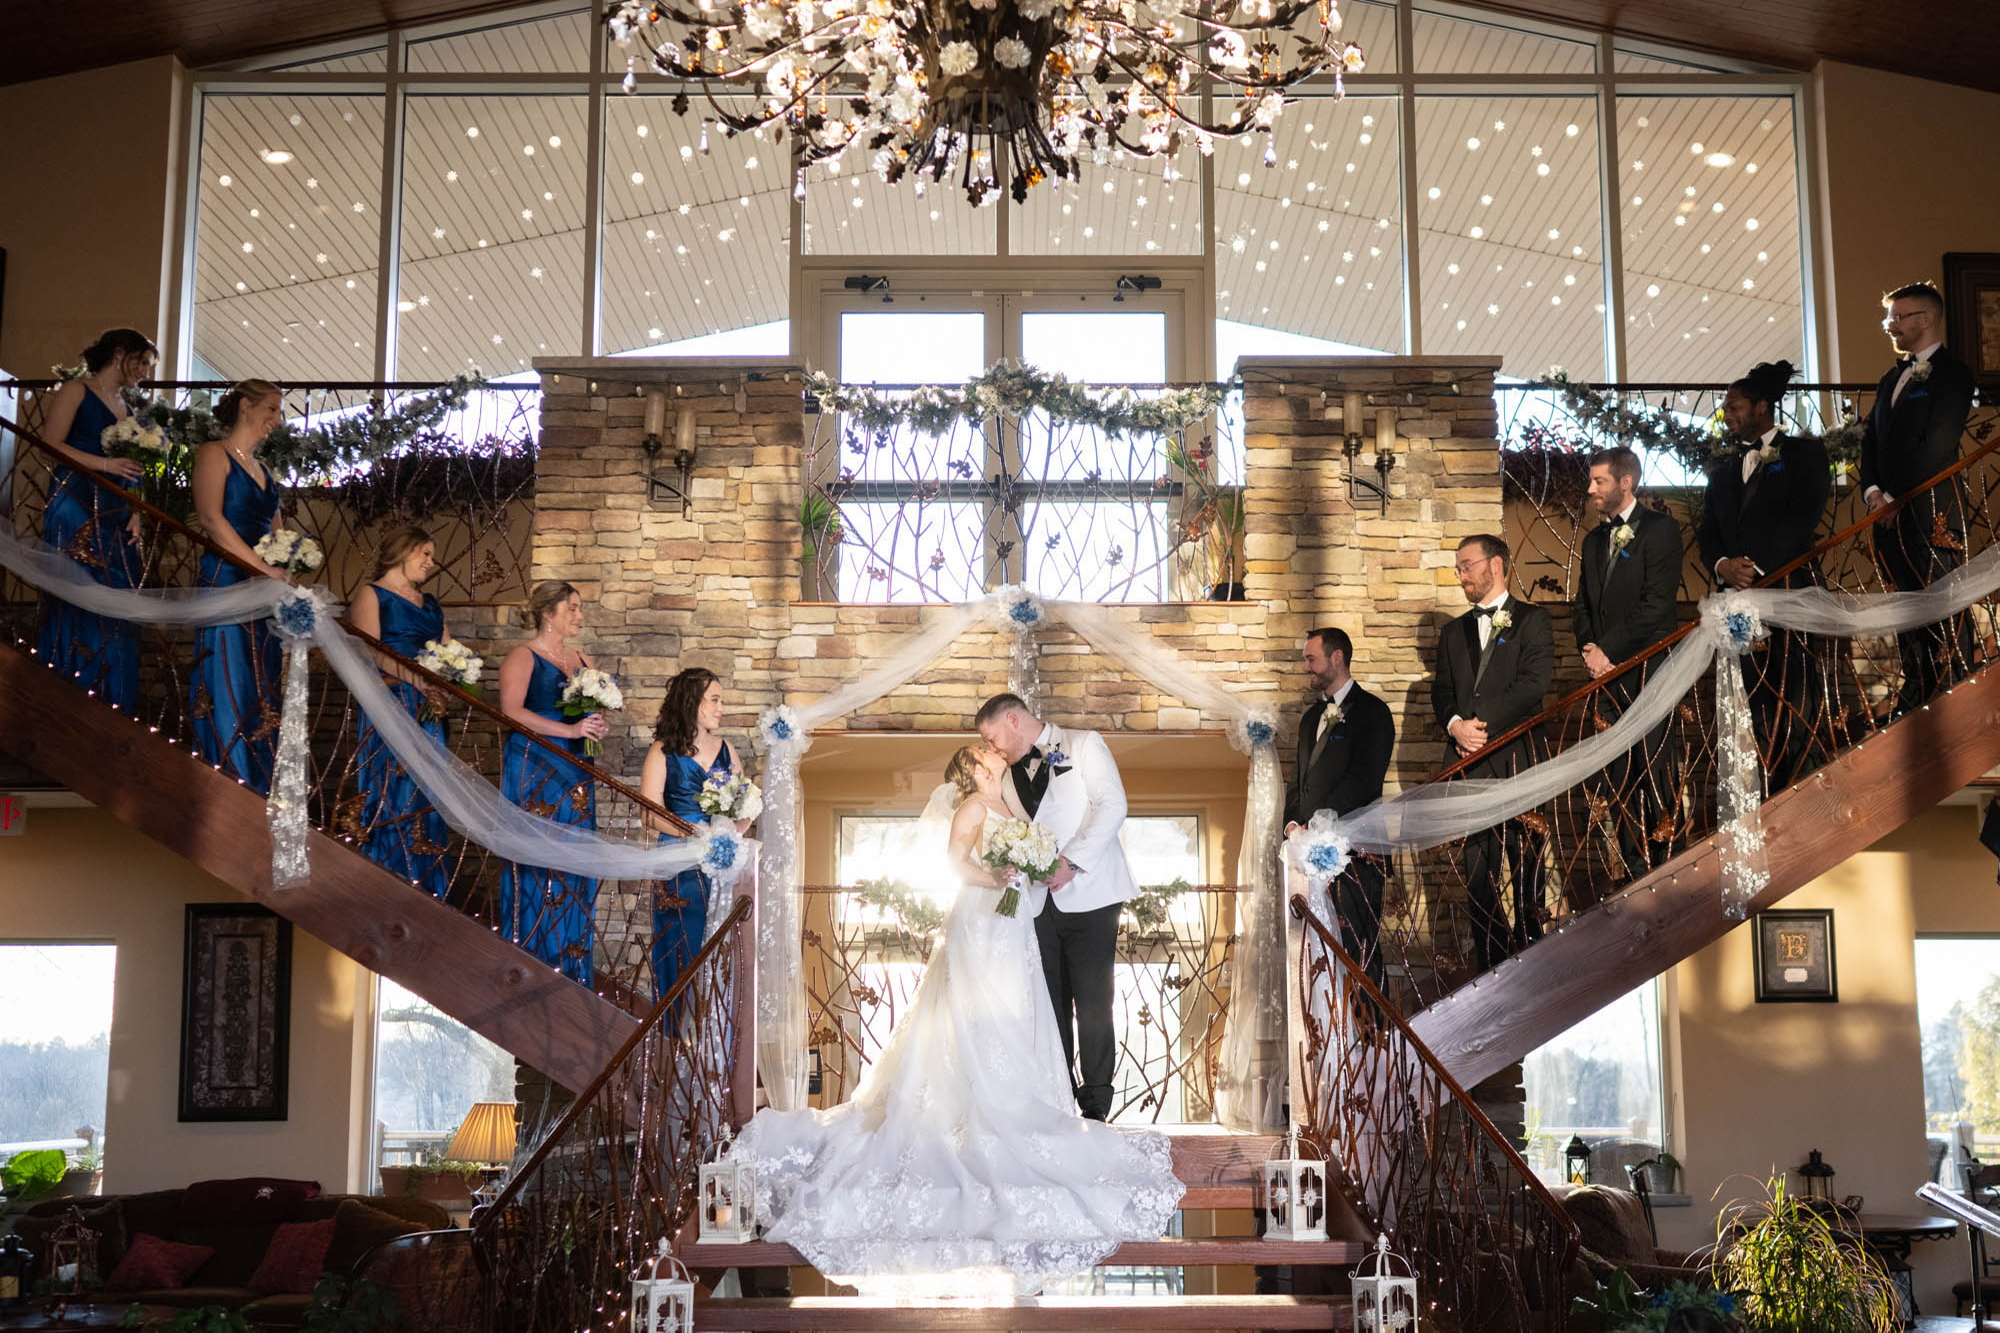 Gorgeous ceremony with first kiss on staircase